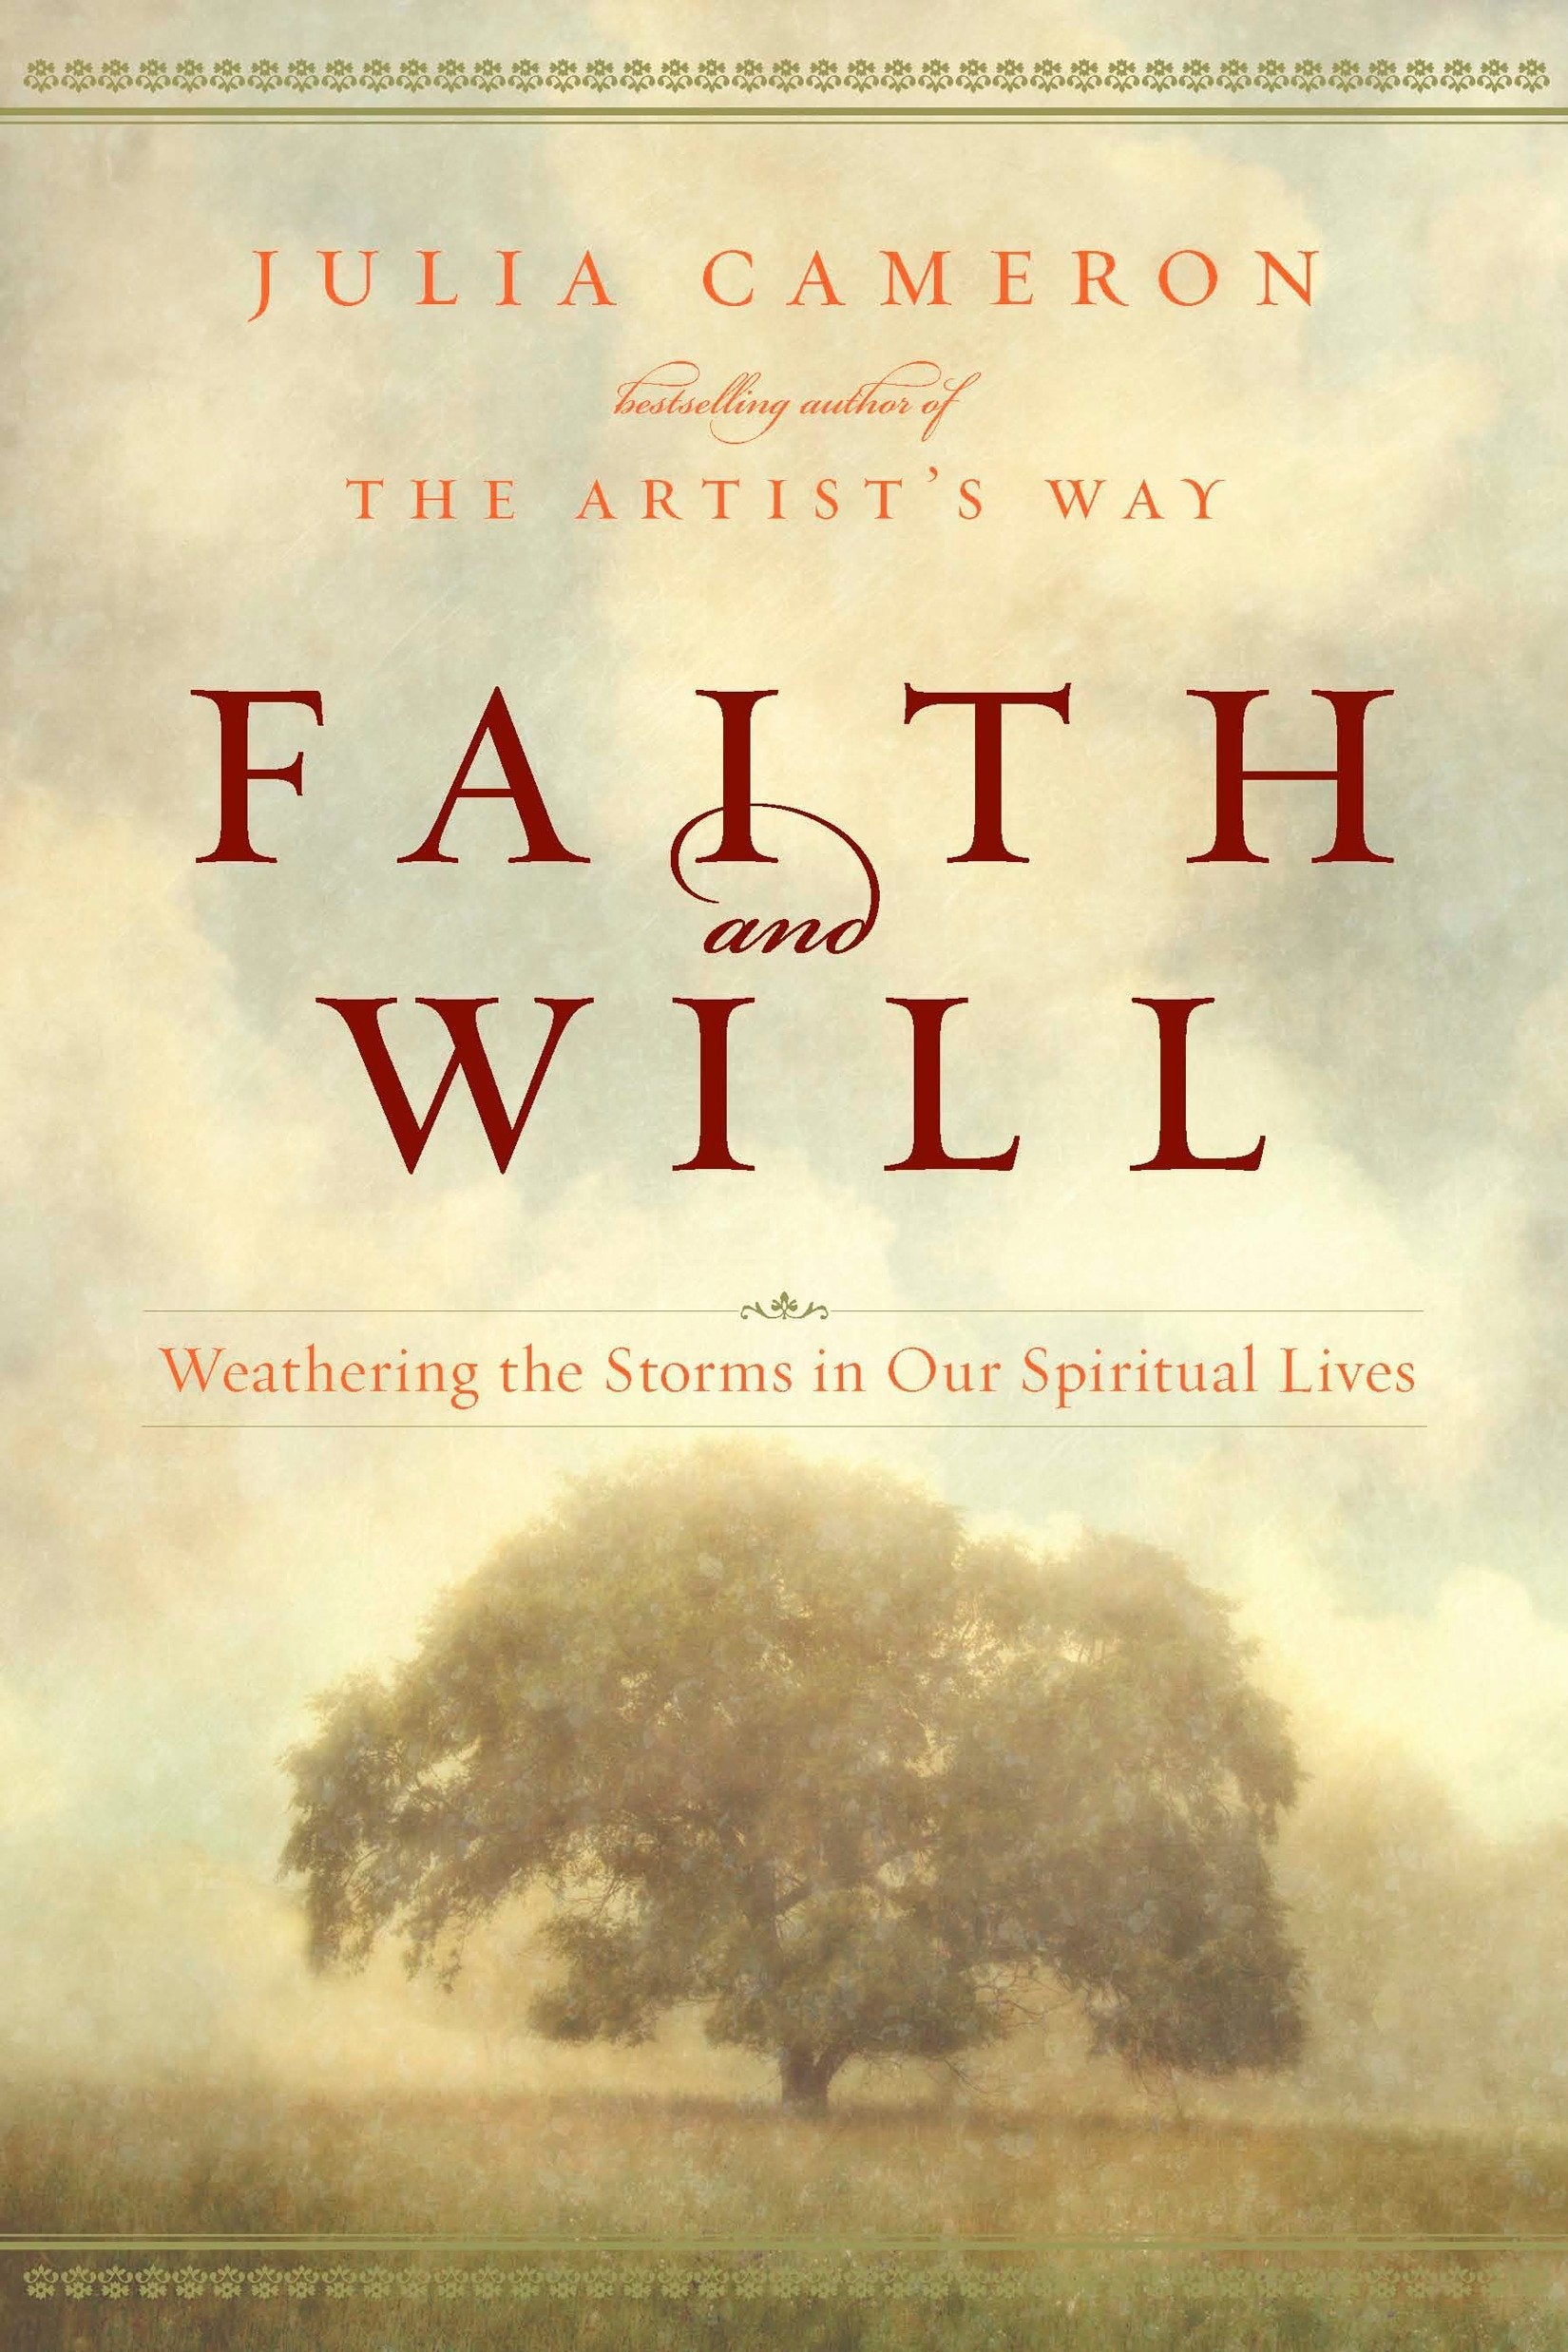 Livre ISBN 1585428019 Faith and Will: Weathering the Storms in Our Spiritual Lives (Julia Cameron)